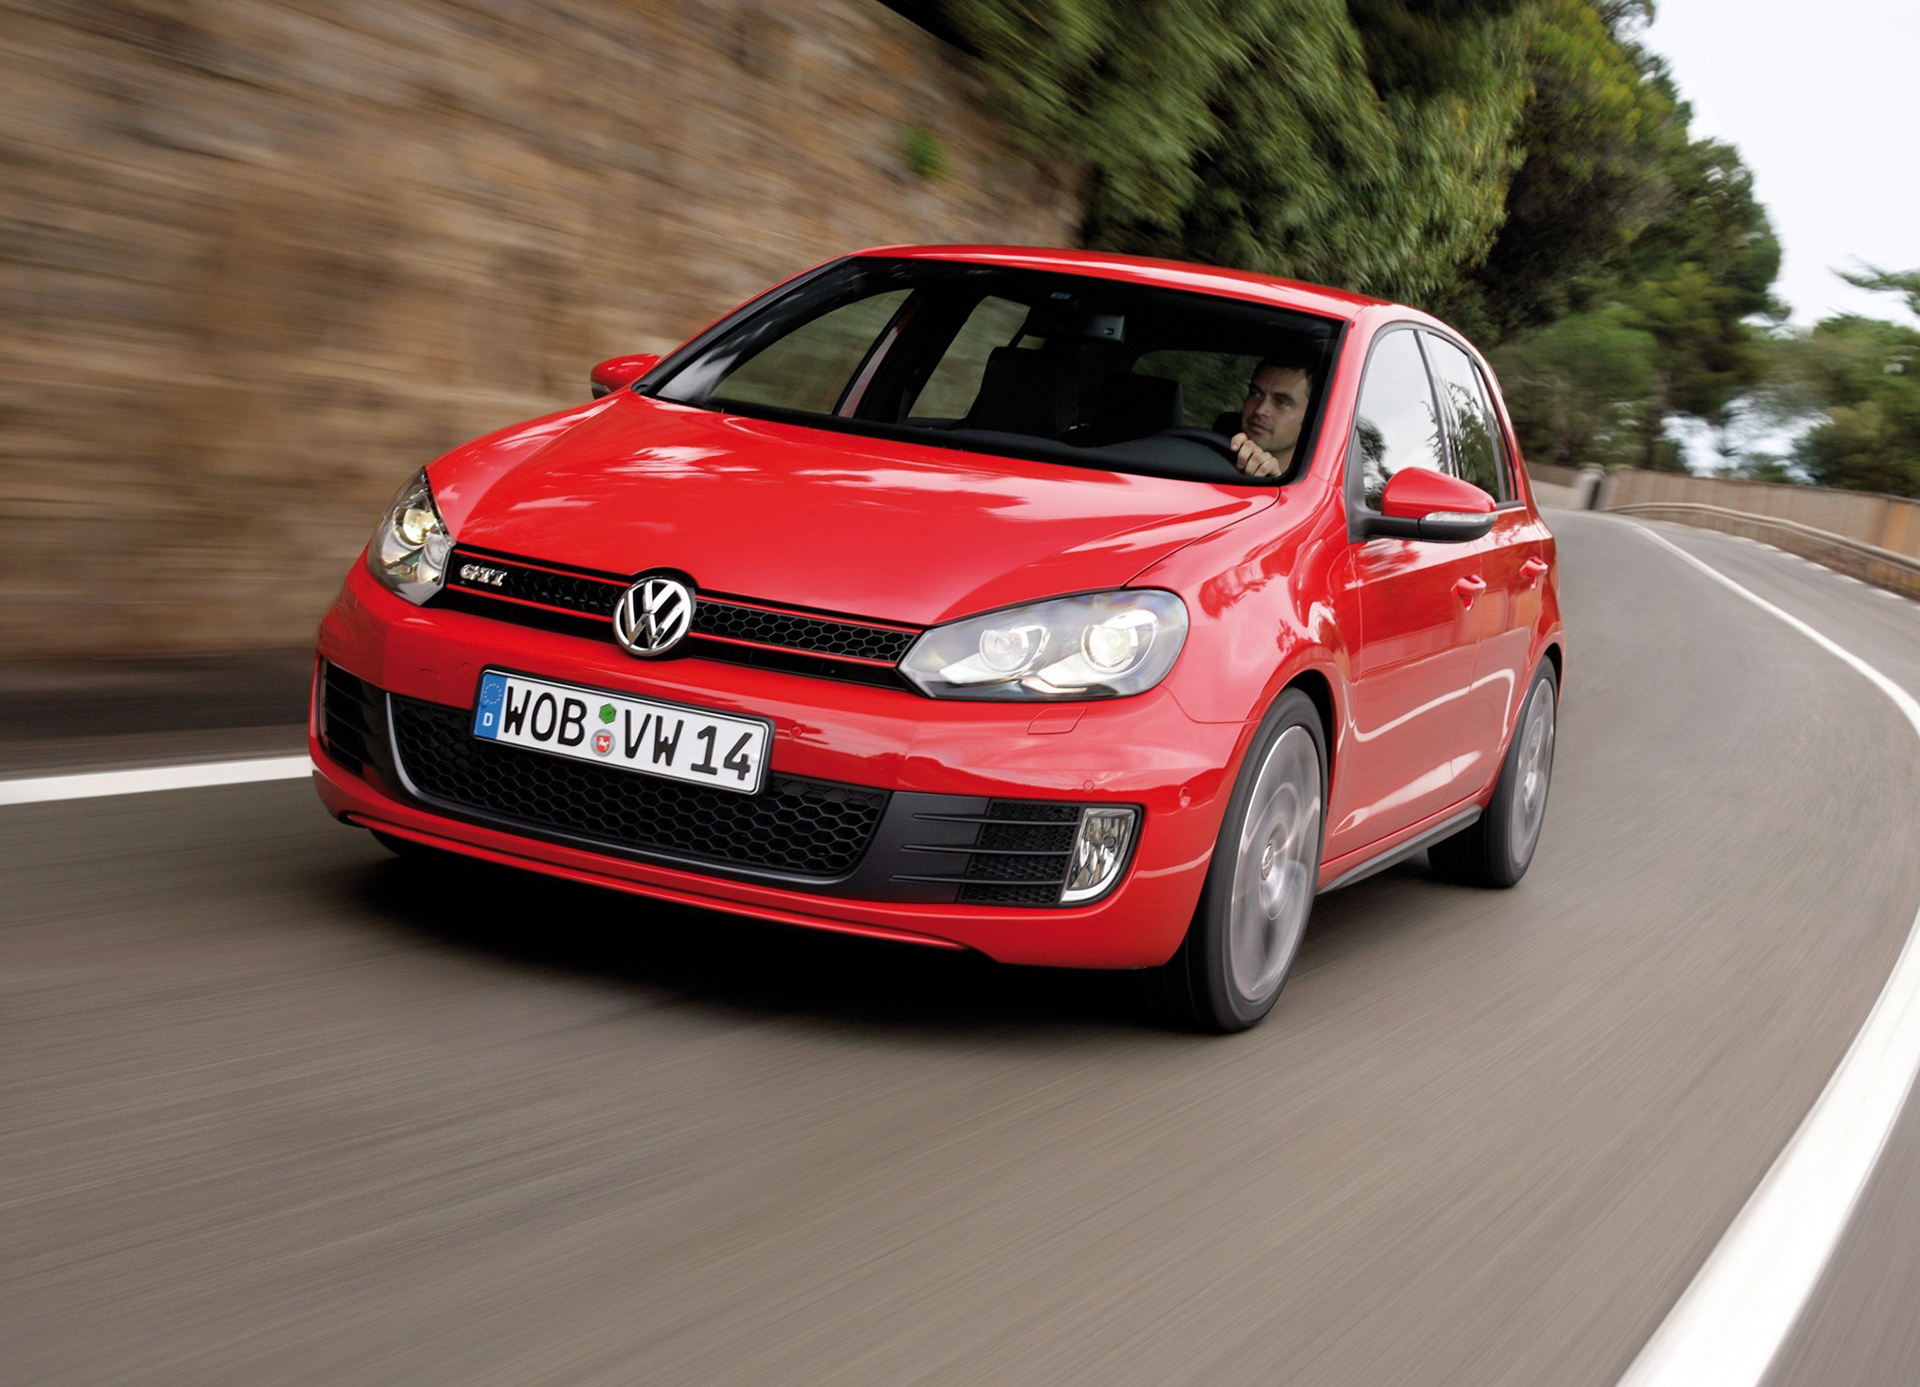 Volkswagen Golf 6 GTI - everything you need to know - All cars news